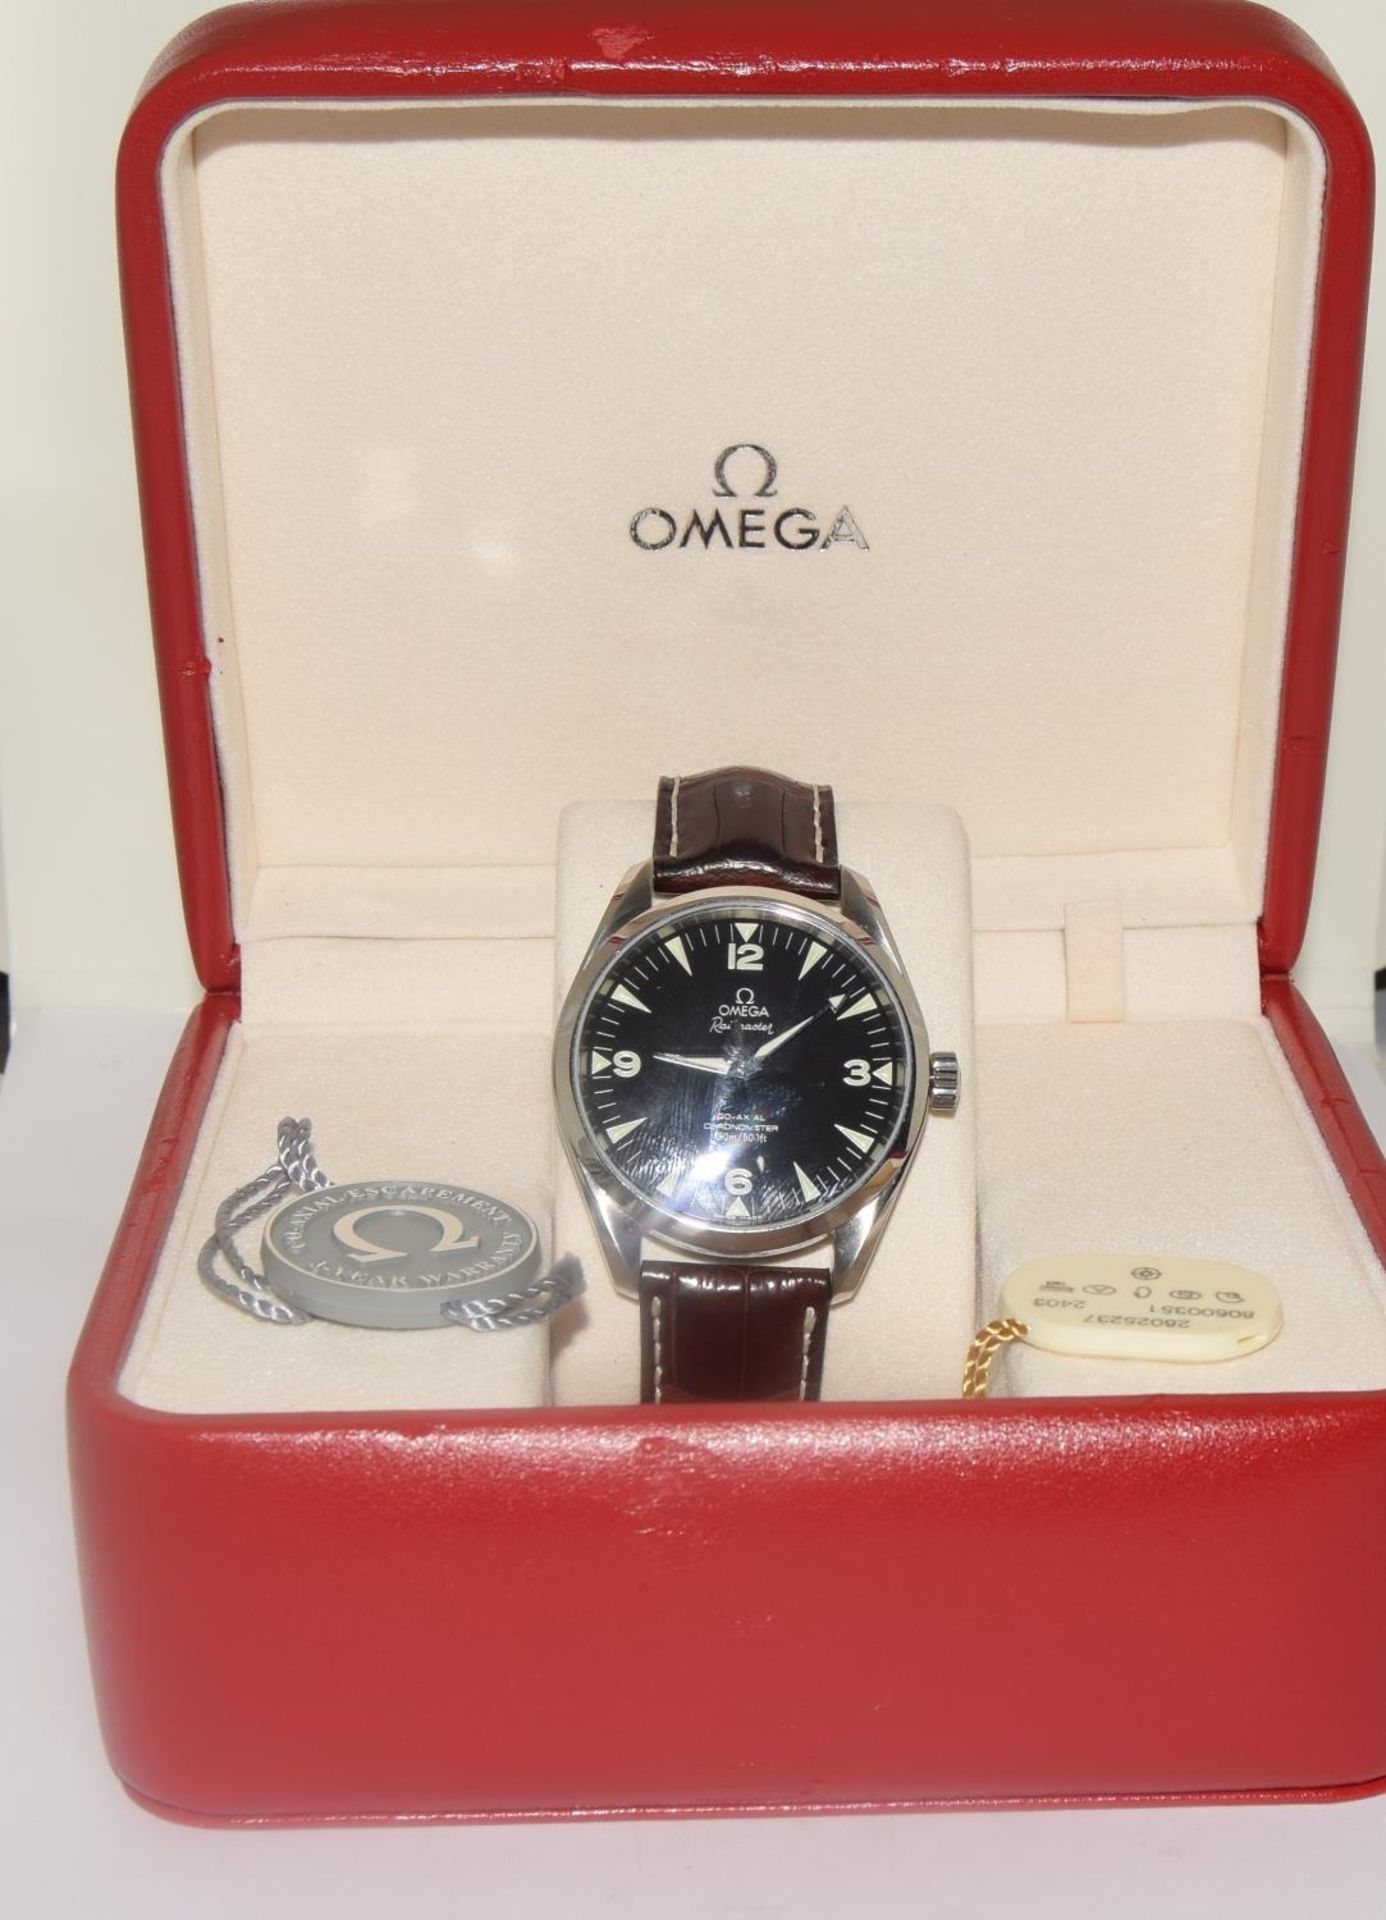 Omega Gents Railmaster, 42mm, boxed and papers, from 2003 - Image 9 of 9